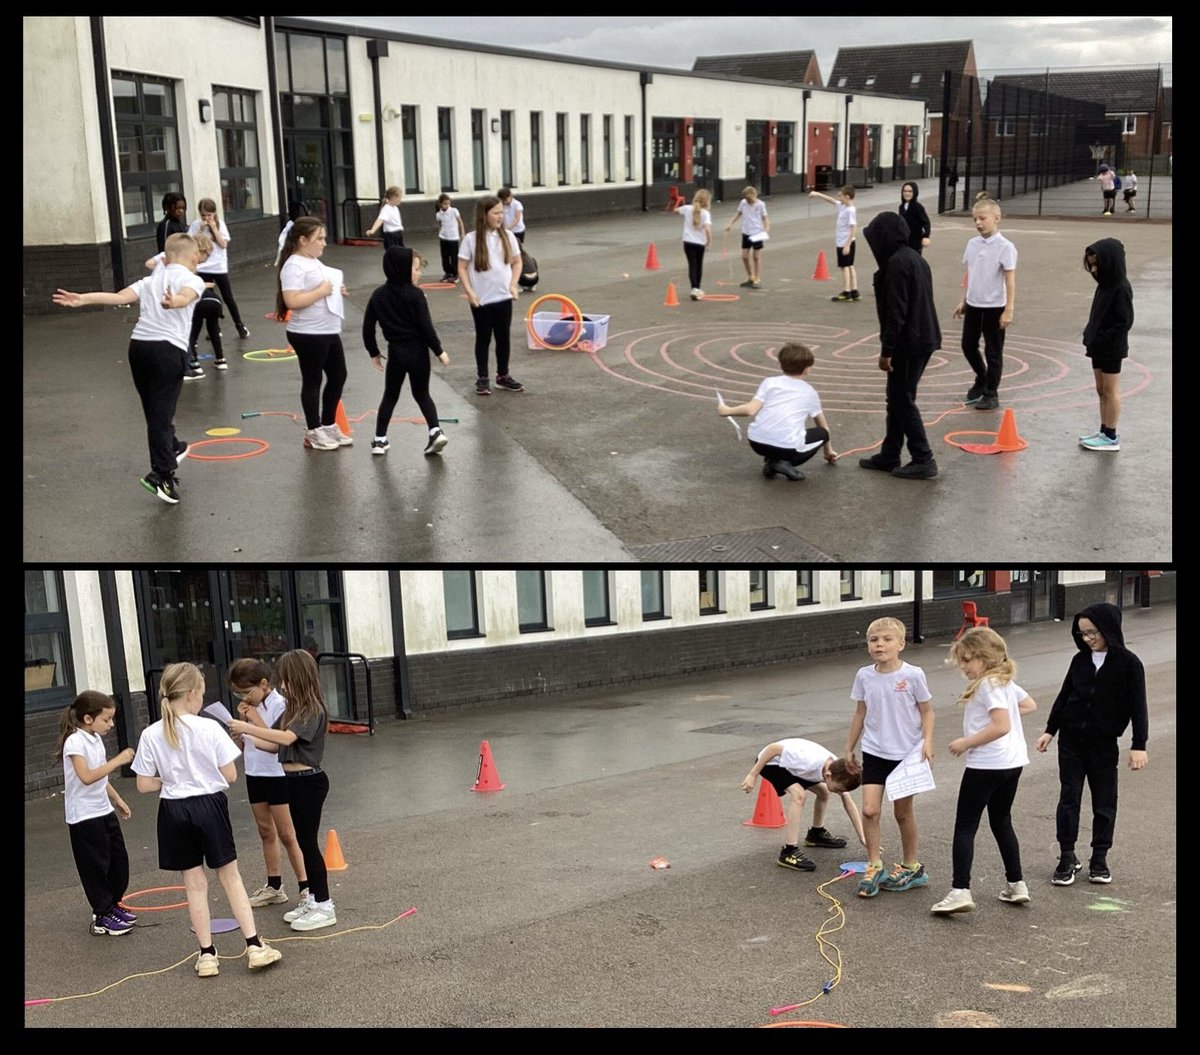 😍 More fabulous fun, fitness and teamwork in PE this afternoon! 😍 @Inspire_Ashton @TrustVictorious @inspire_pe